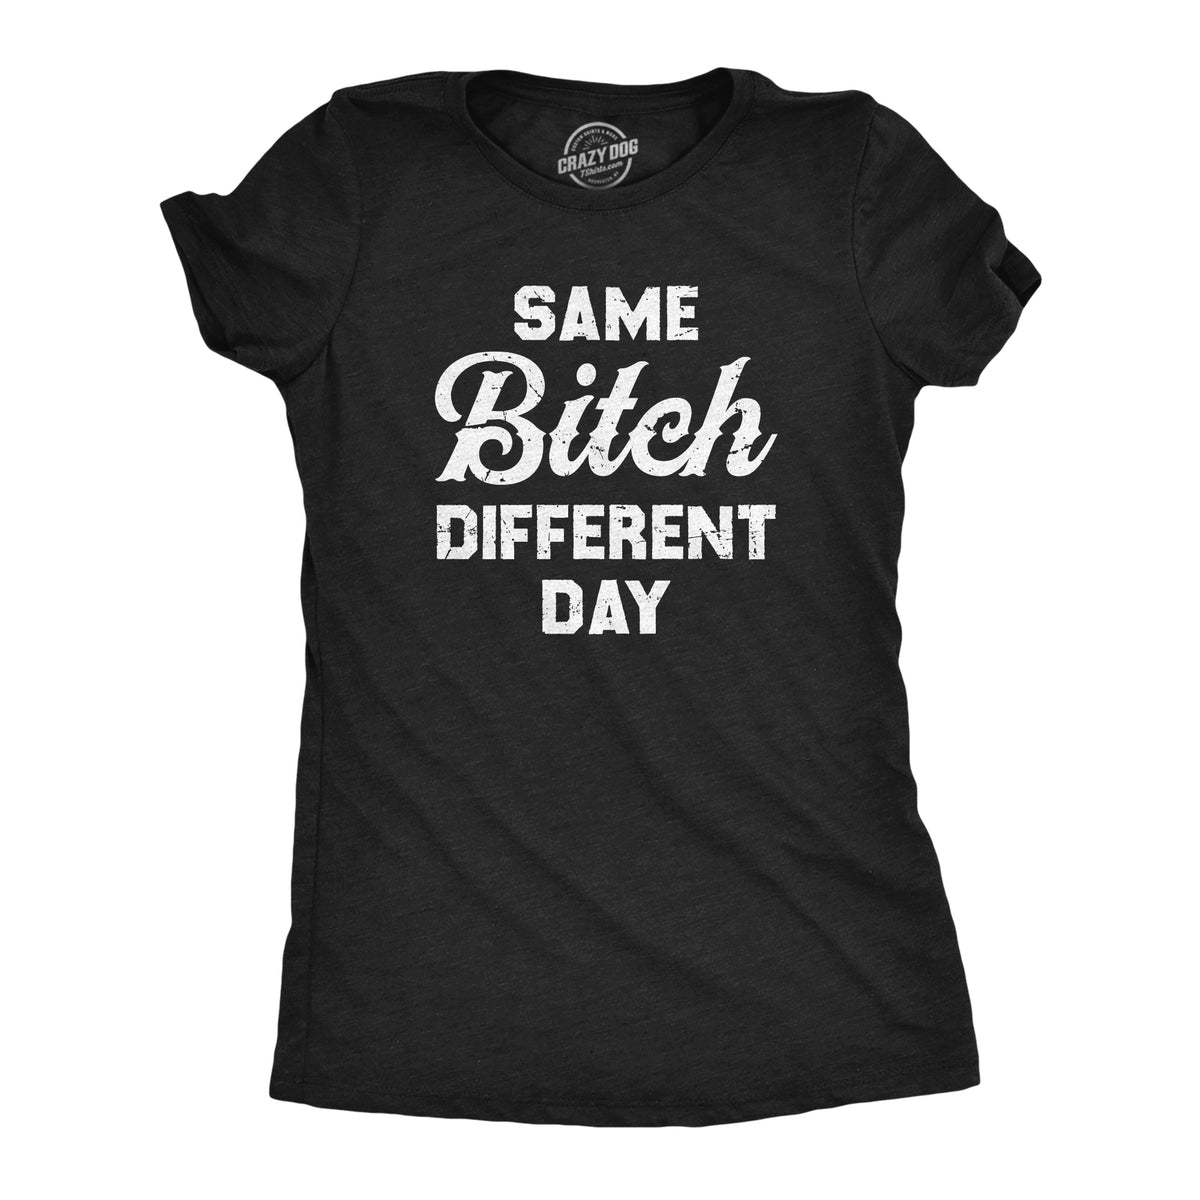 Funny Heather Black - BITCH Same Bitch Different Day Womens T Shirt Nerdy Sarcastic Tee